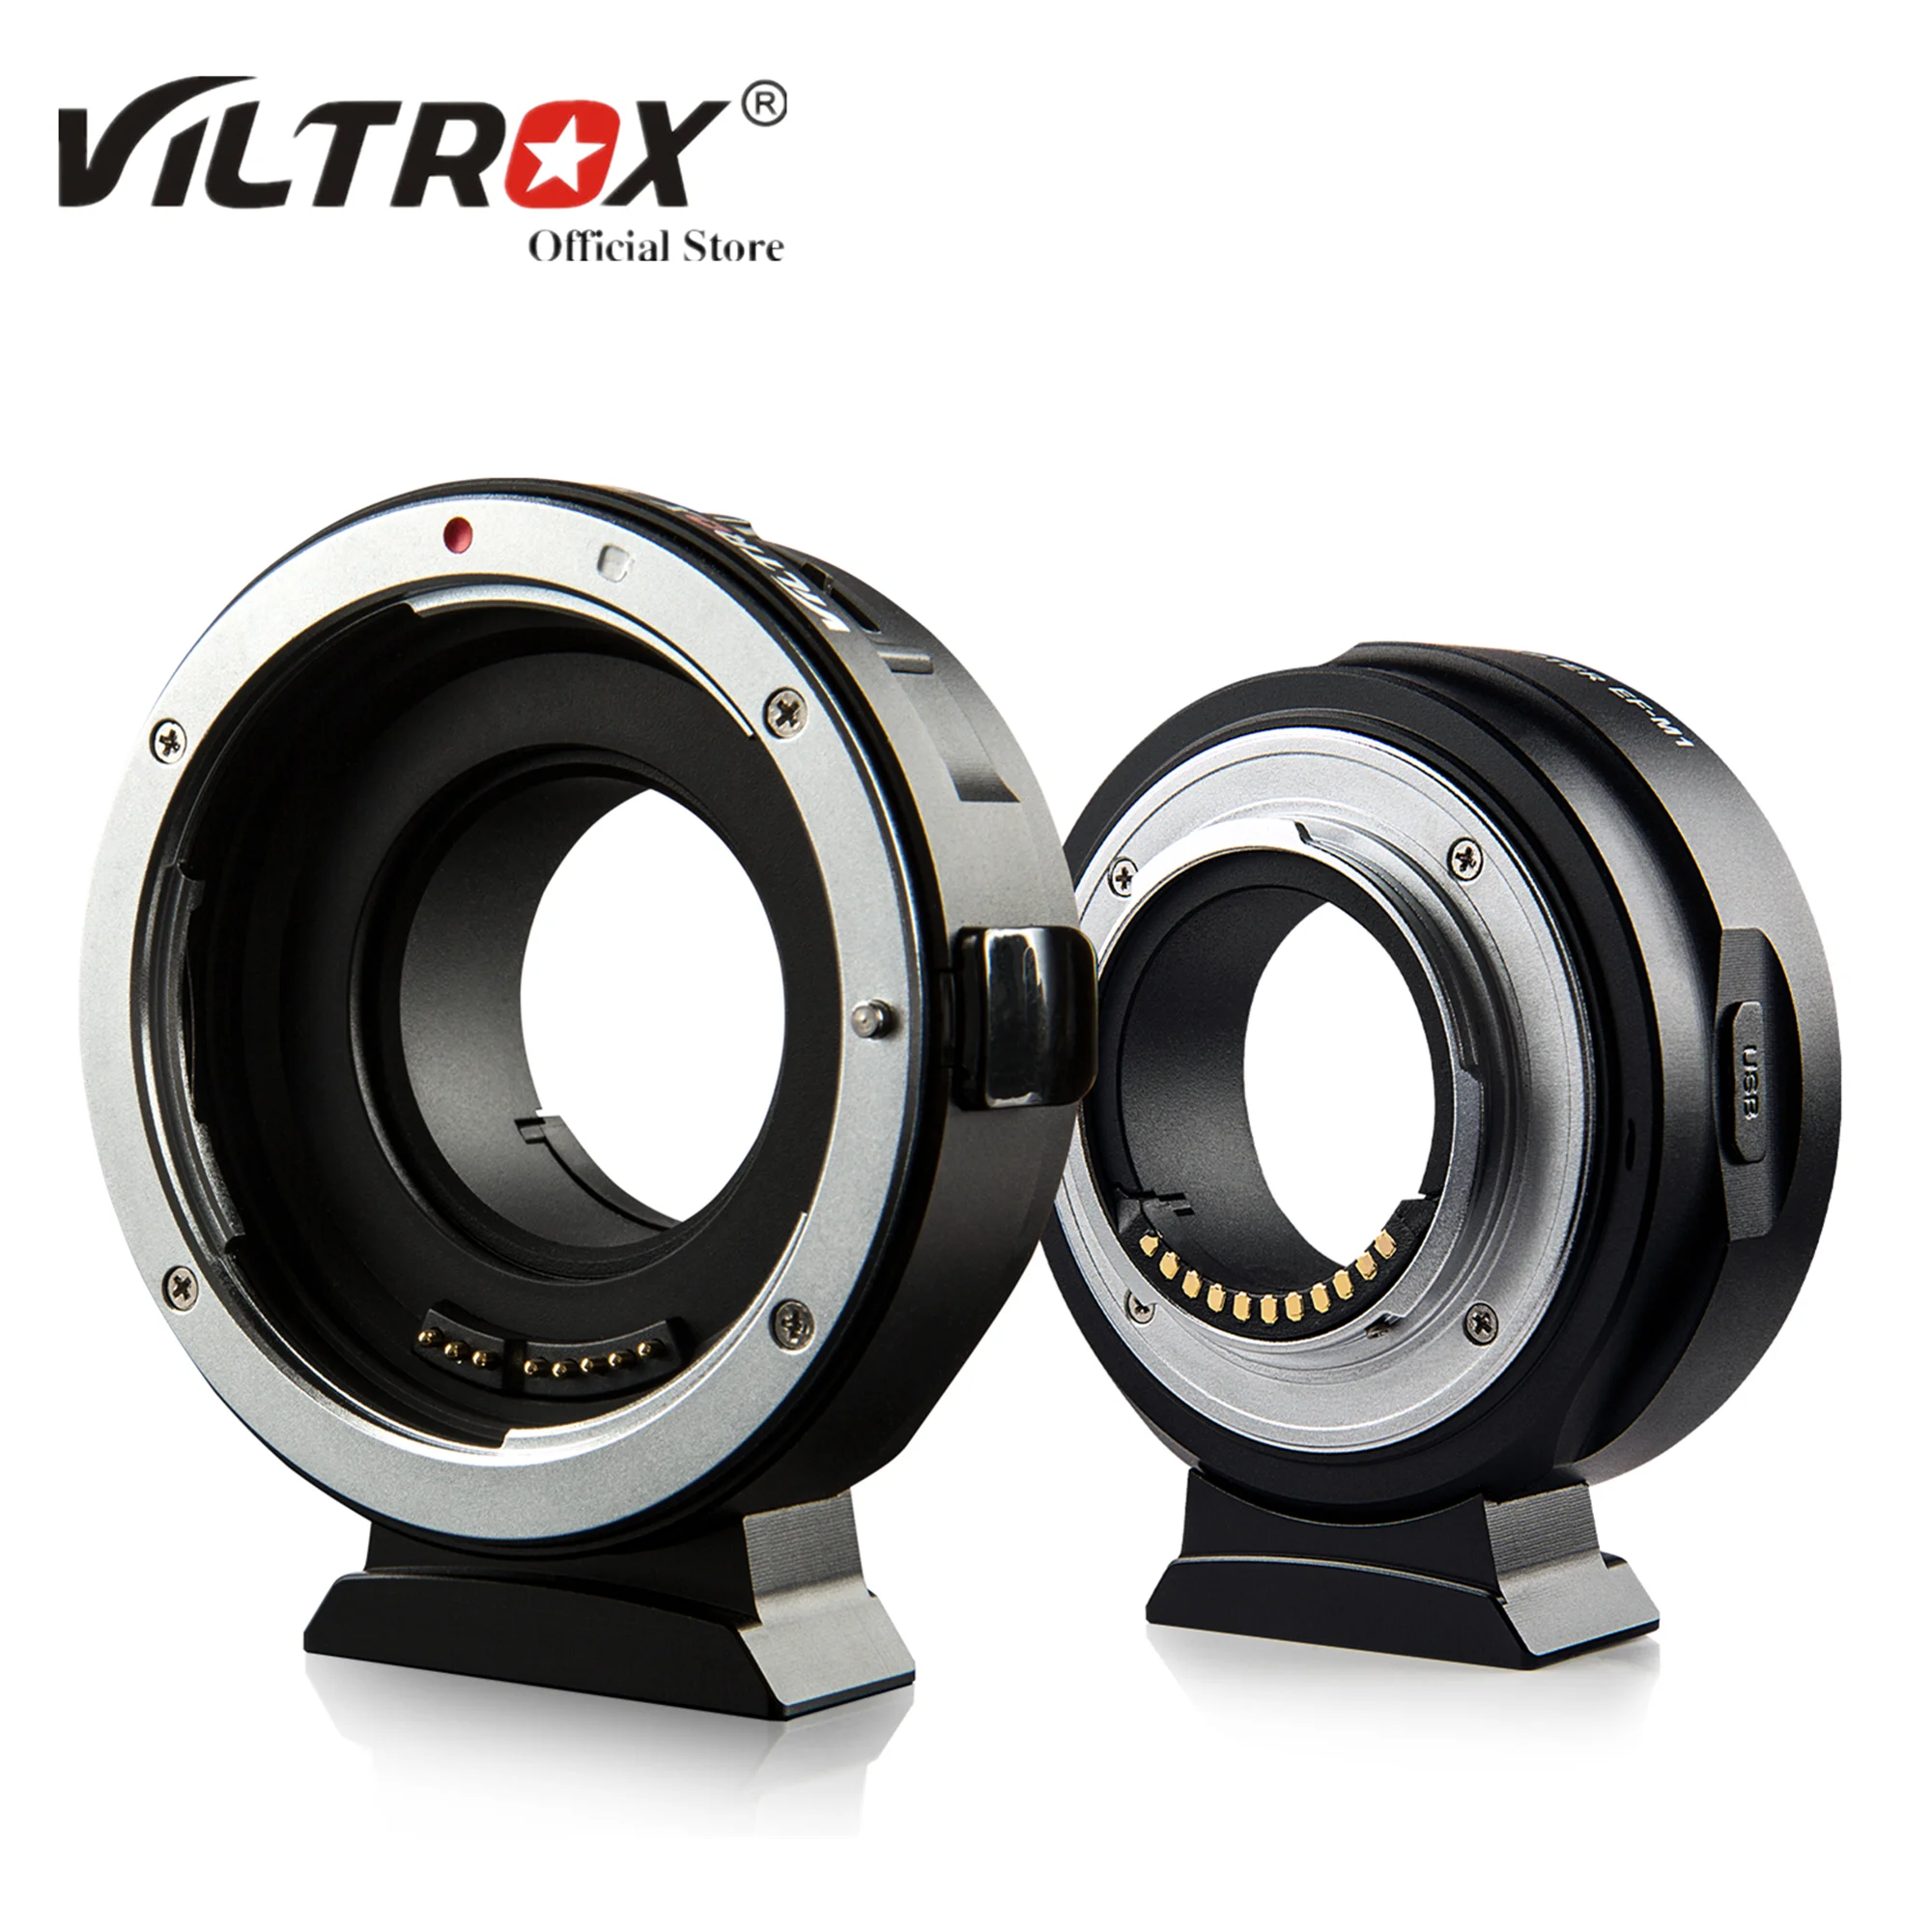 

Viltrox EF-M1 M4TF Lens Adapter Auto Focus for Canon EF EF-S Lens to M4/3 Camera GH5 GH4 GX85 Olympus E-M5 II E-M10 III BMCC 4K